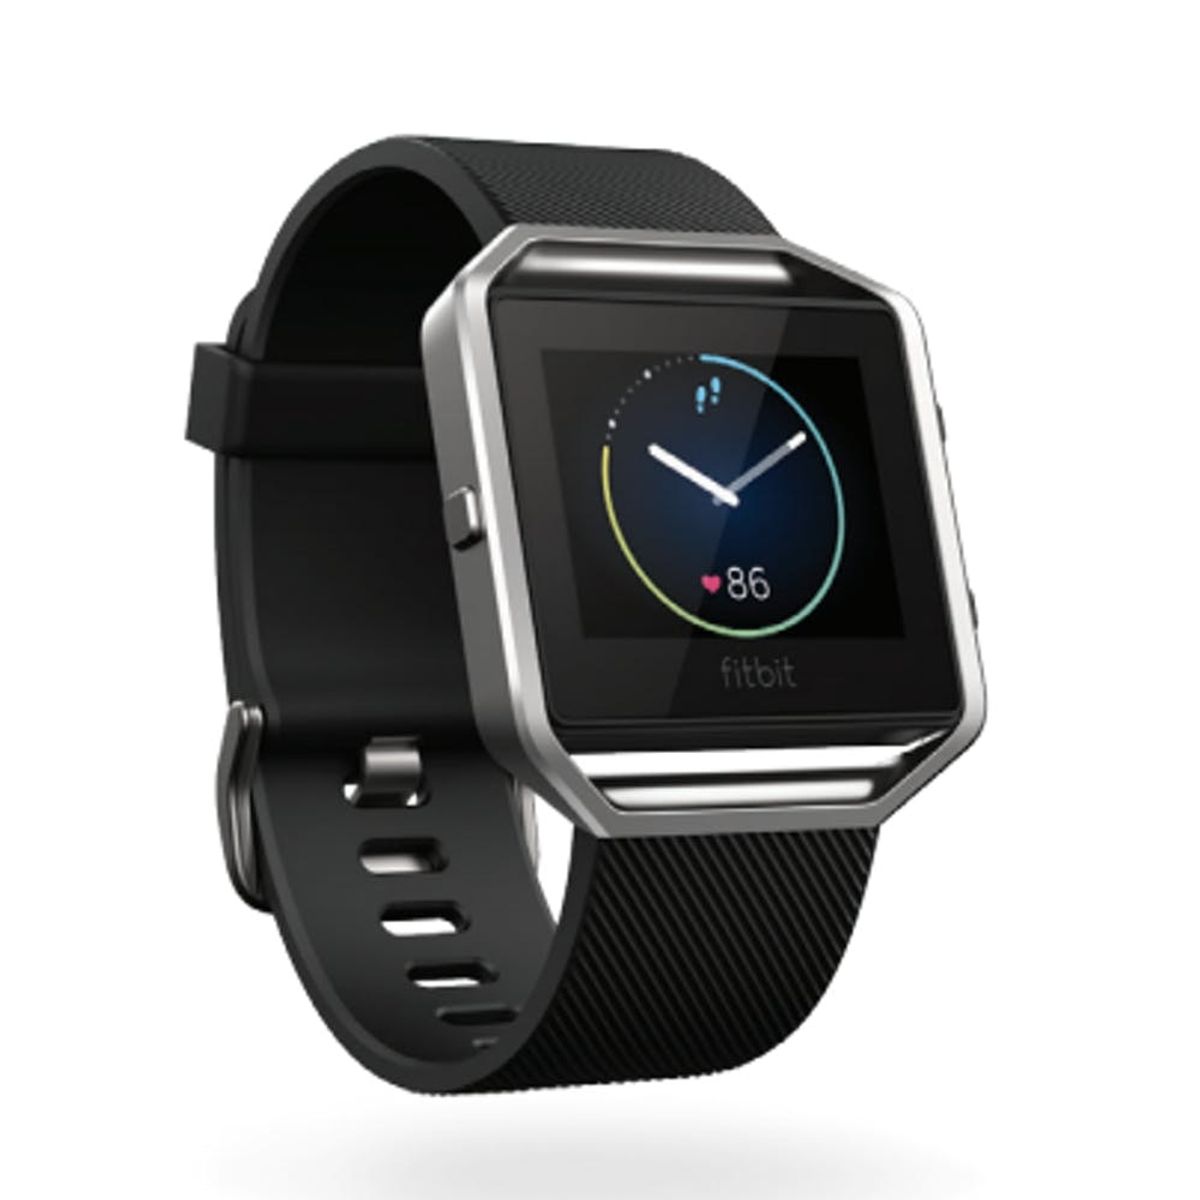 Fitbit’s New Smart Fitness Watch Will Put the Apple Watch to Shame